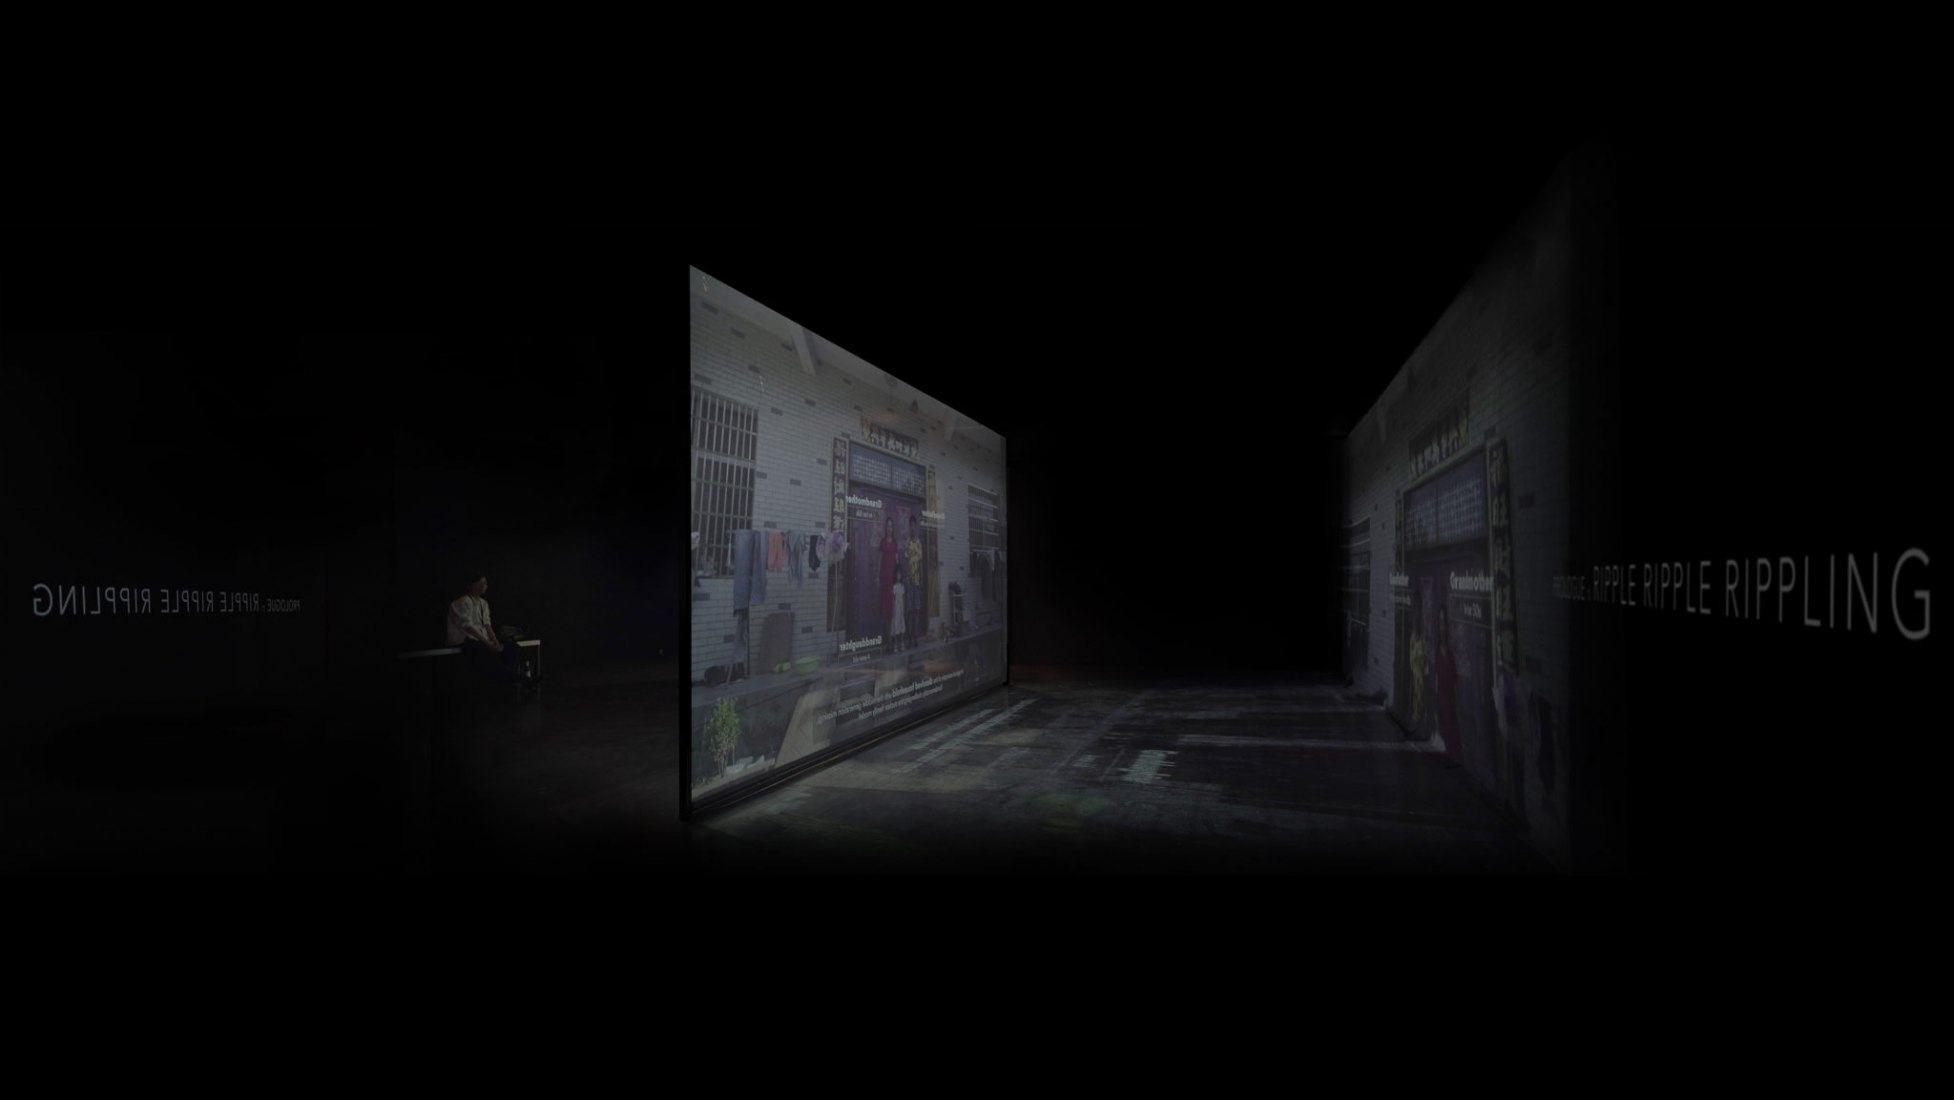 Immersive video installation at the Driving the Human Festival, Berlin, 2021. Photographed by Chen Zhan.